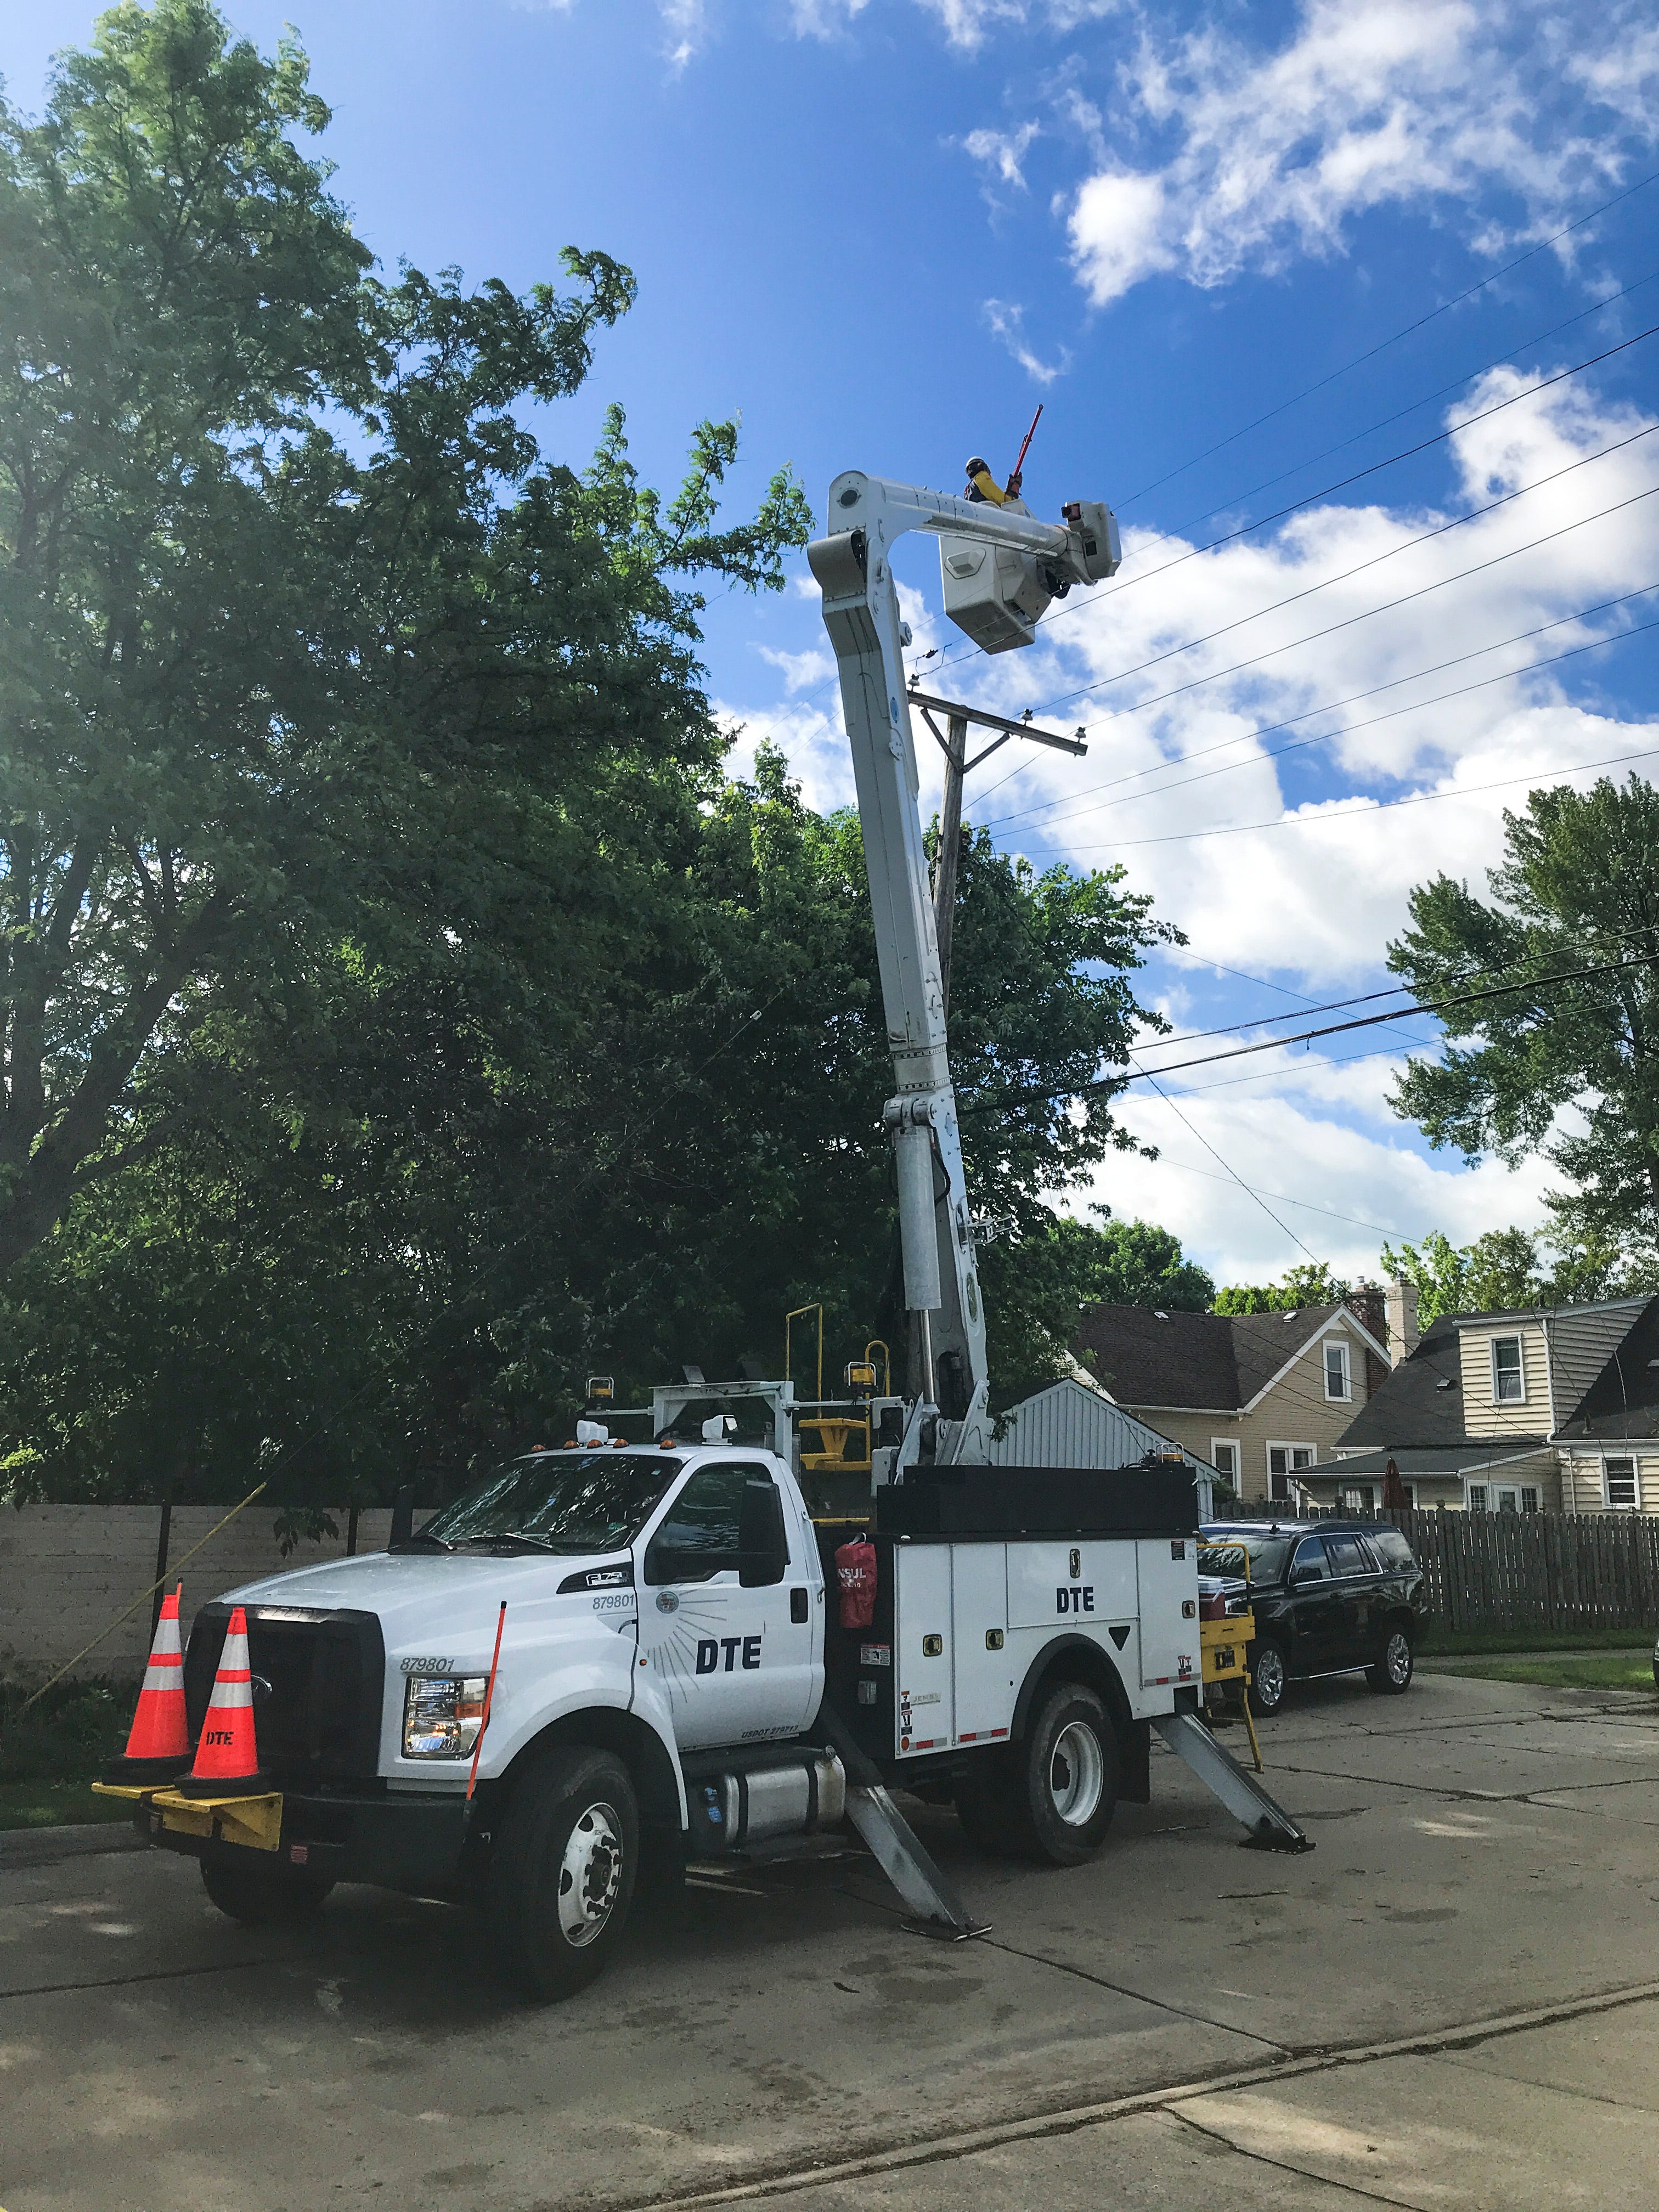 A DTE crew works on restoring power to damaged power lines along Charlevoix Street in Grosse Pointe Woods.